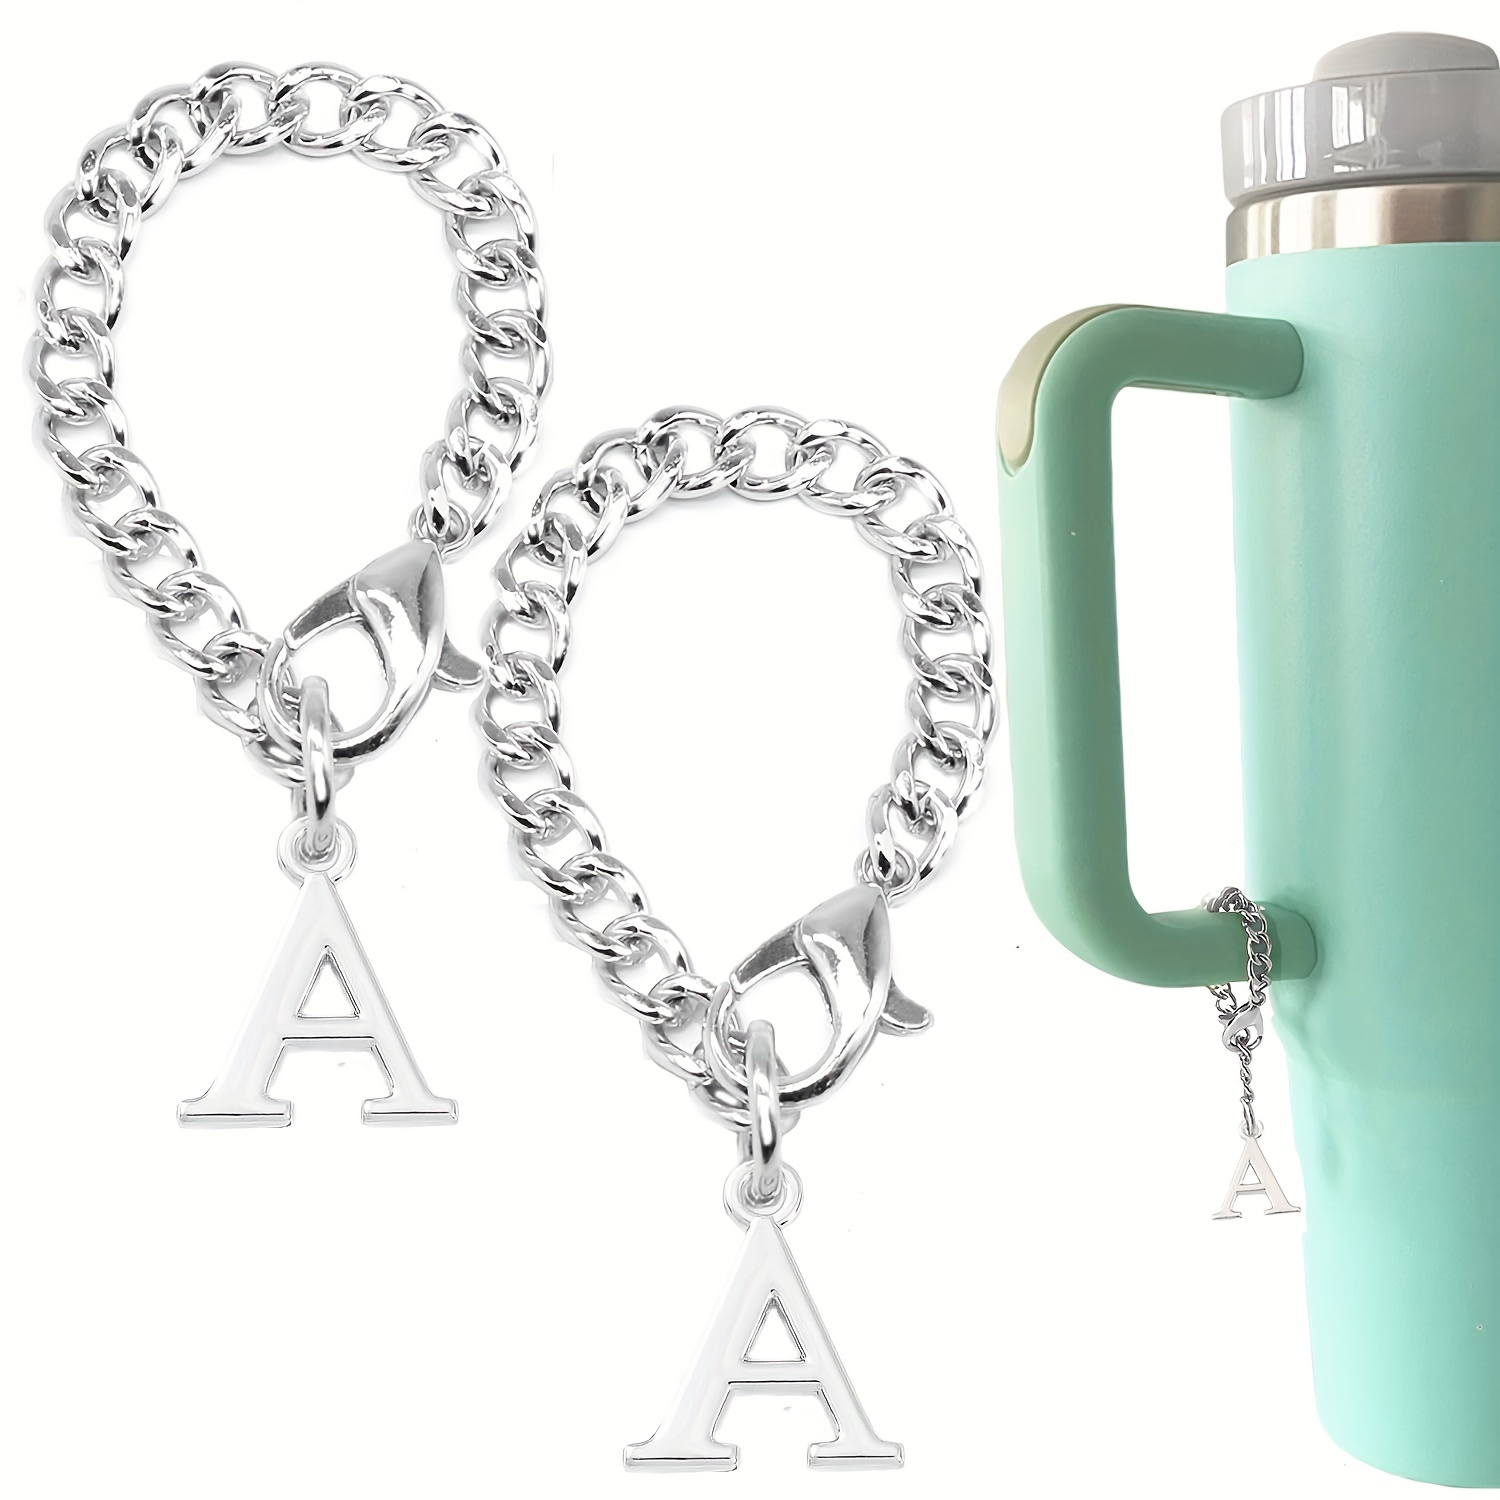 Tumbler Cup Croc Charm, Accessories for Stanley Cup, Croc Charms